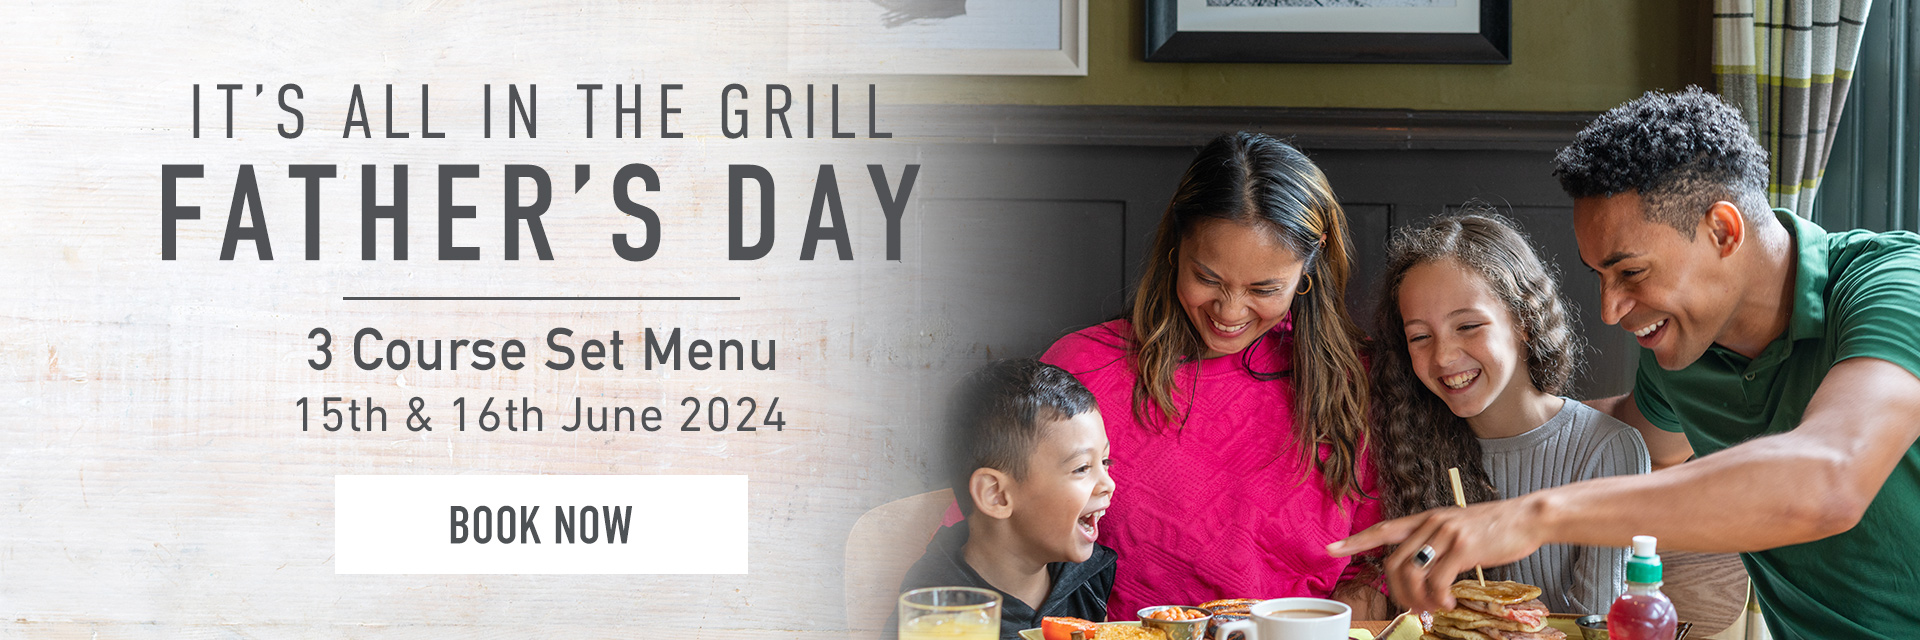 Father’s Day at Harvester Pavilions